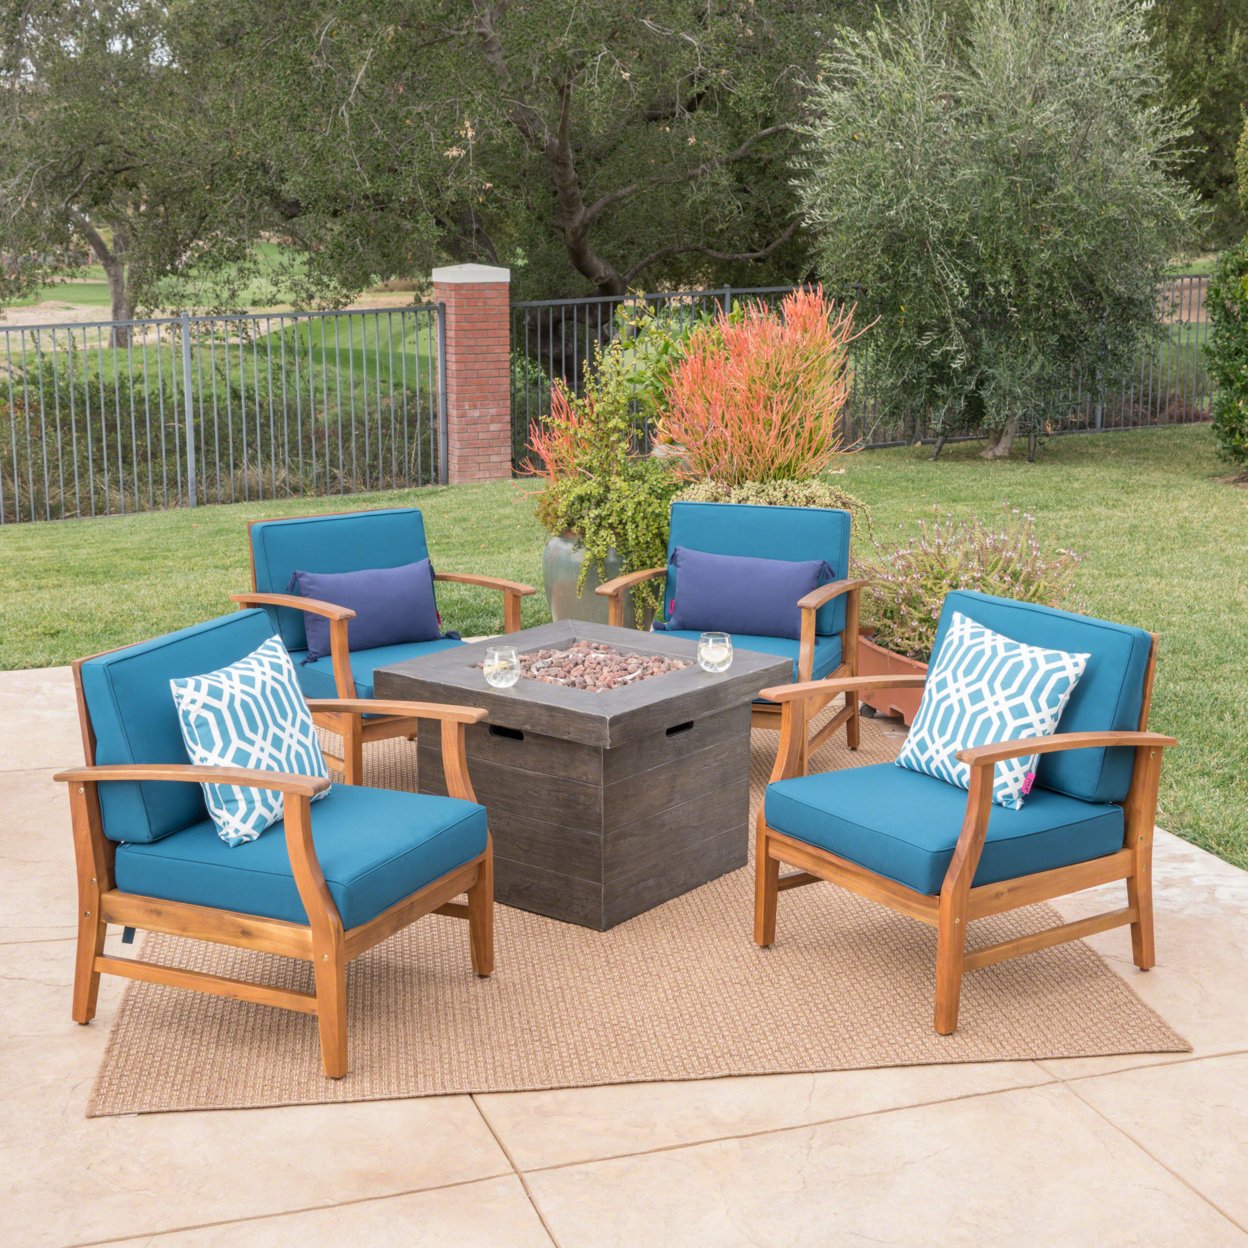 Easter Outdoor 4 Seat Teak Finished Acacia Wood Club Chairs Fire Pit Chat Set - Gray + Dark Gray